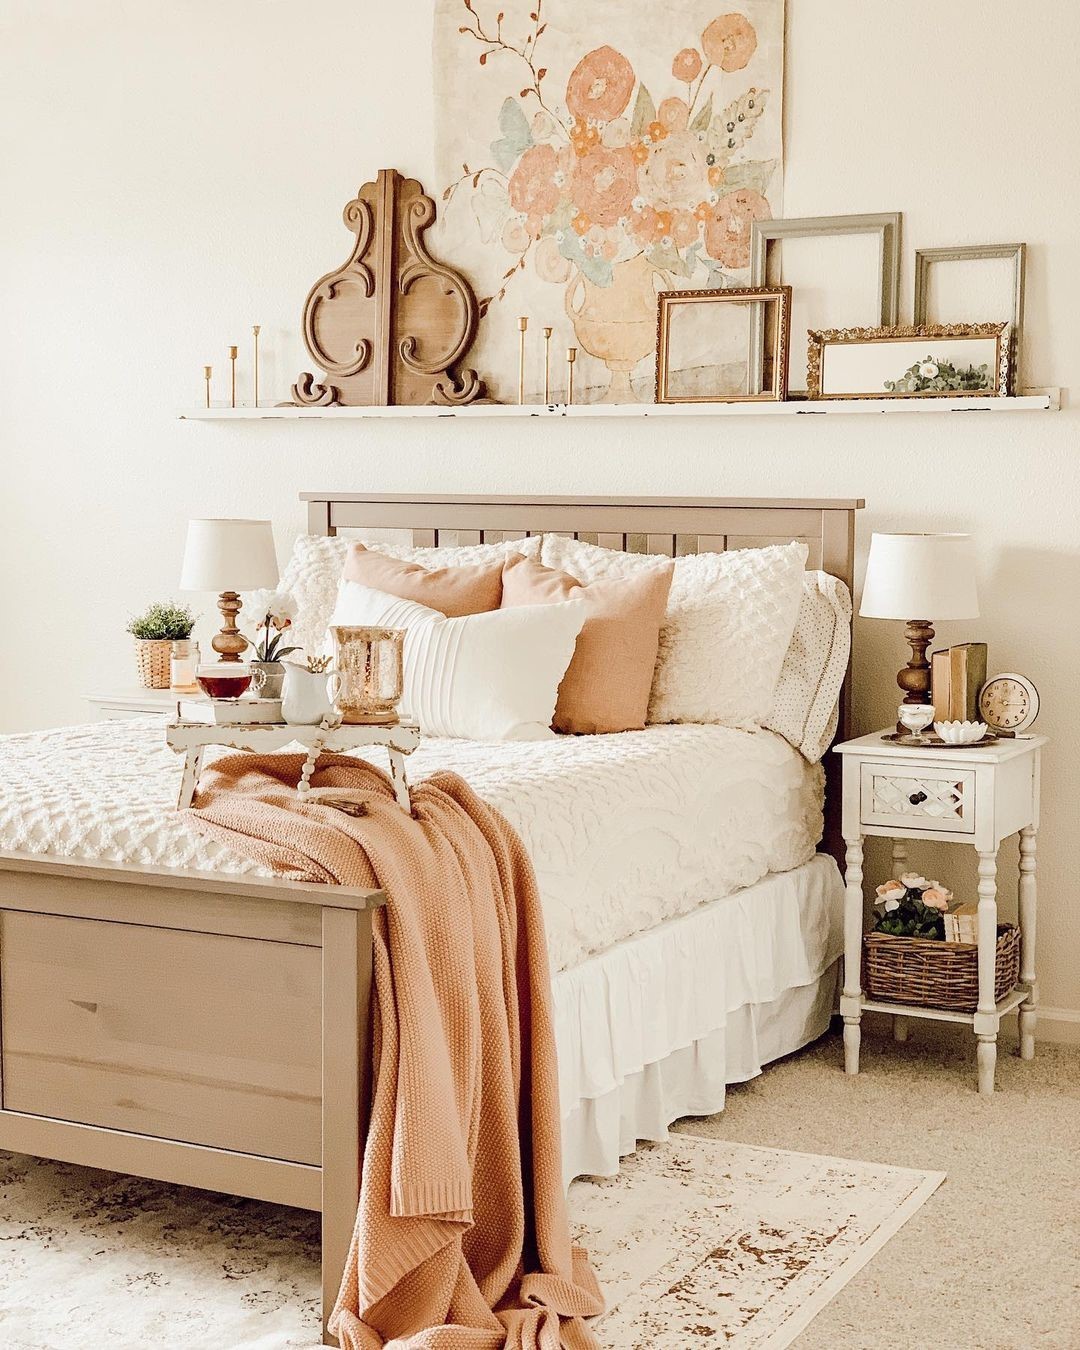 a bedroom with rustic bedding and furnishings to add coziness and charm to the room